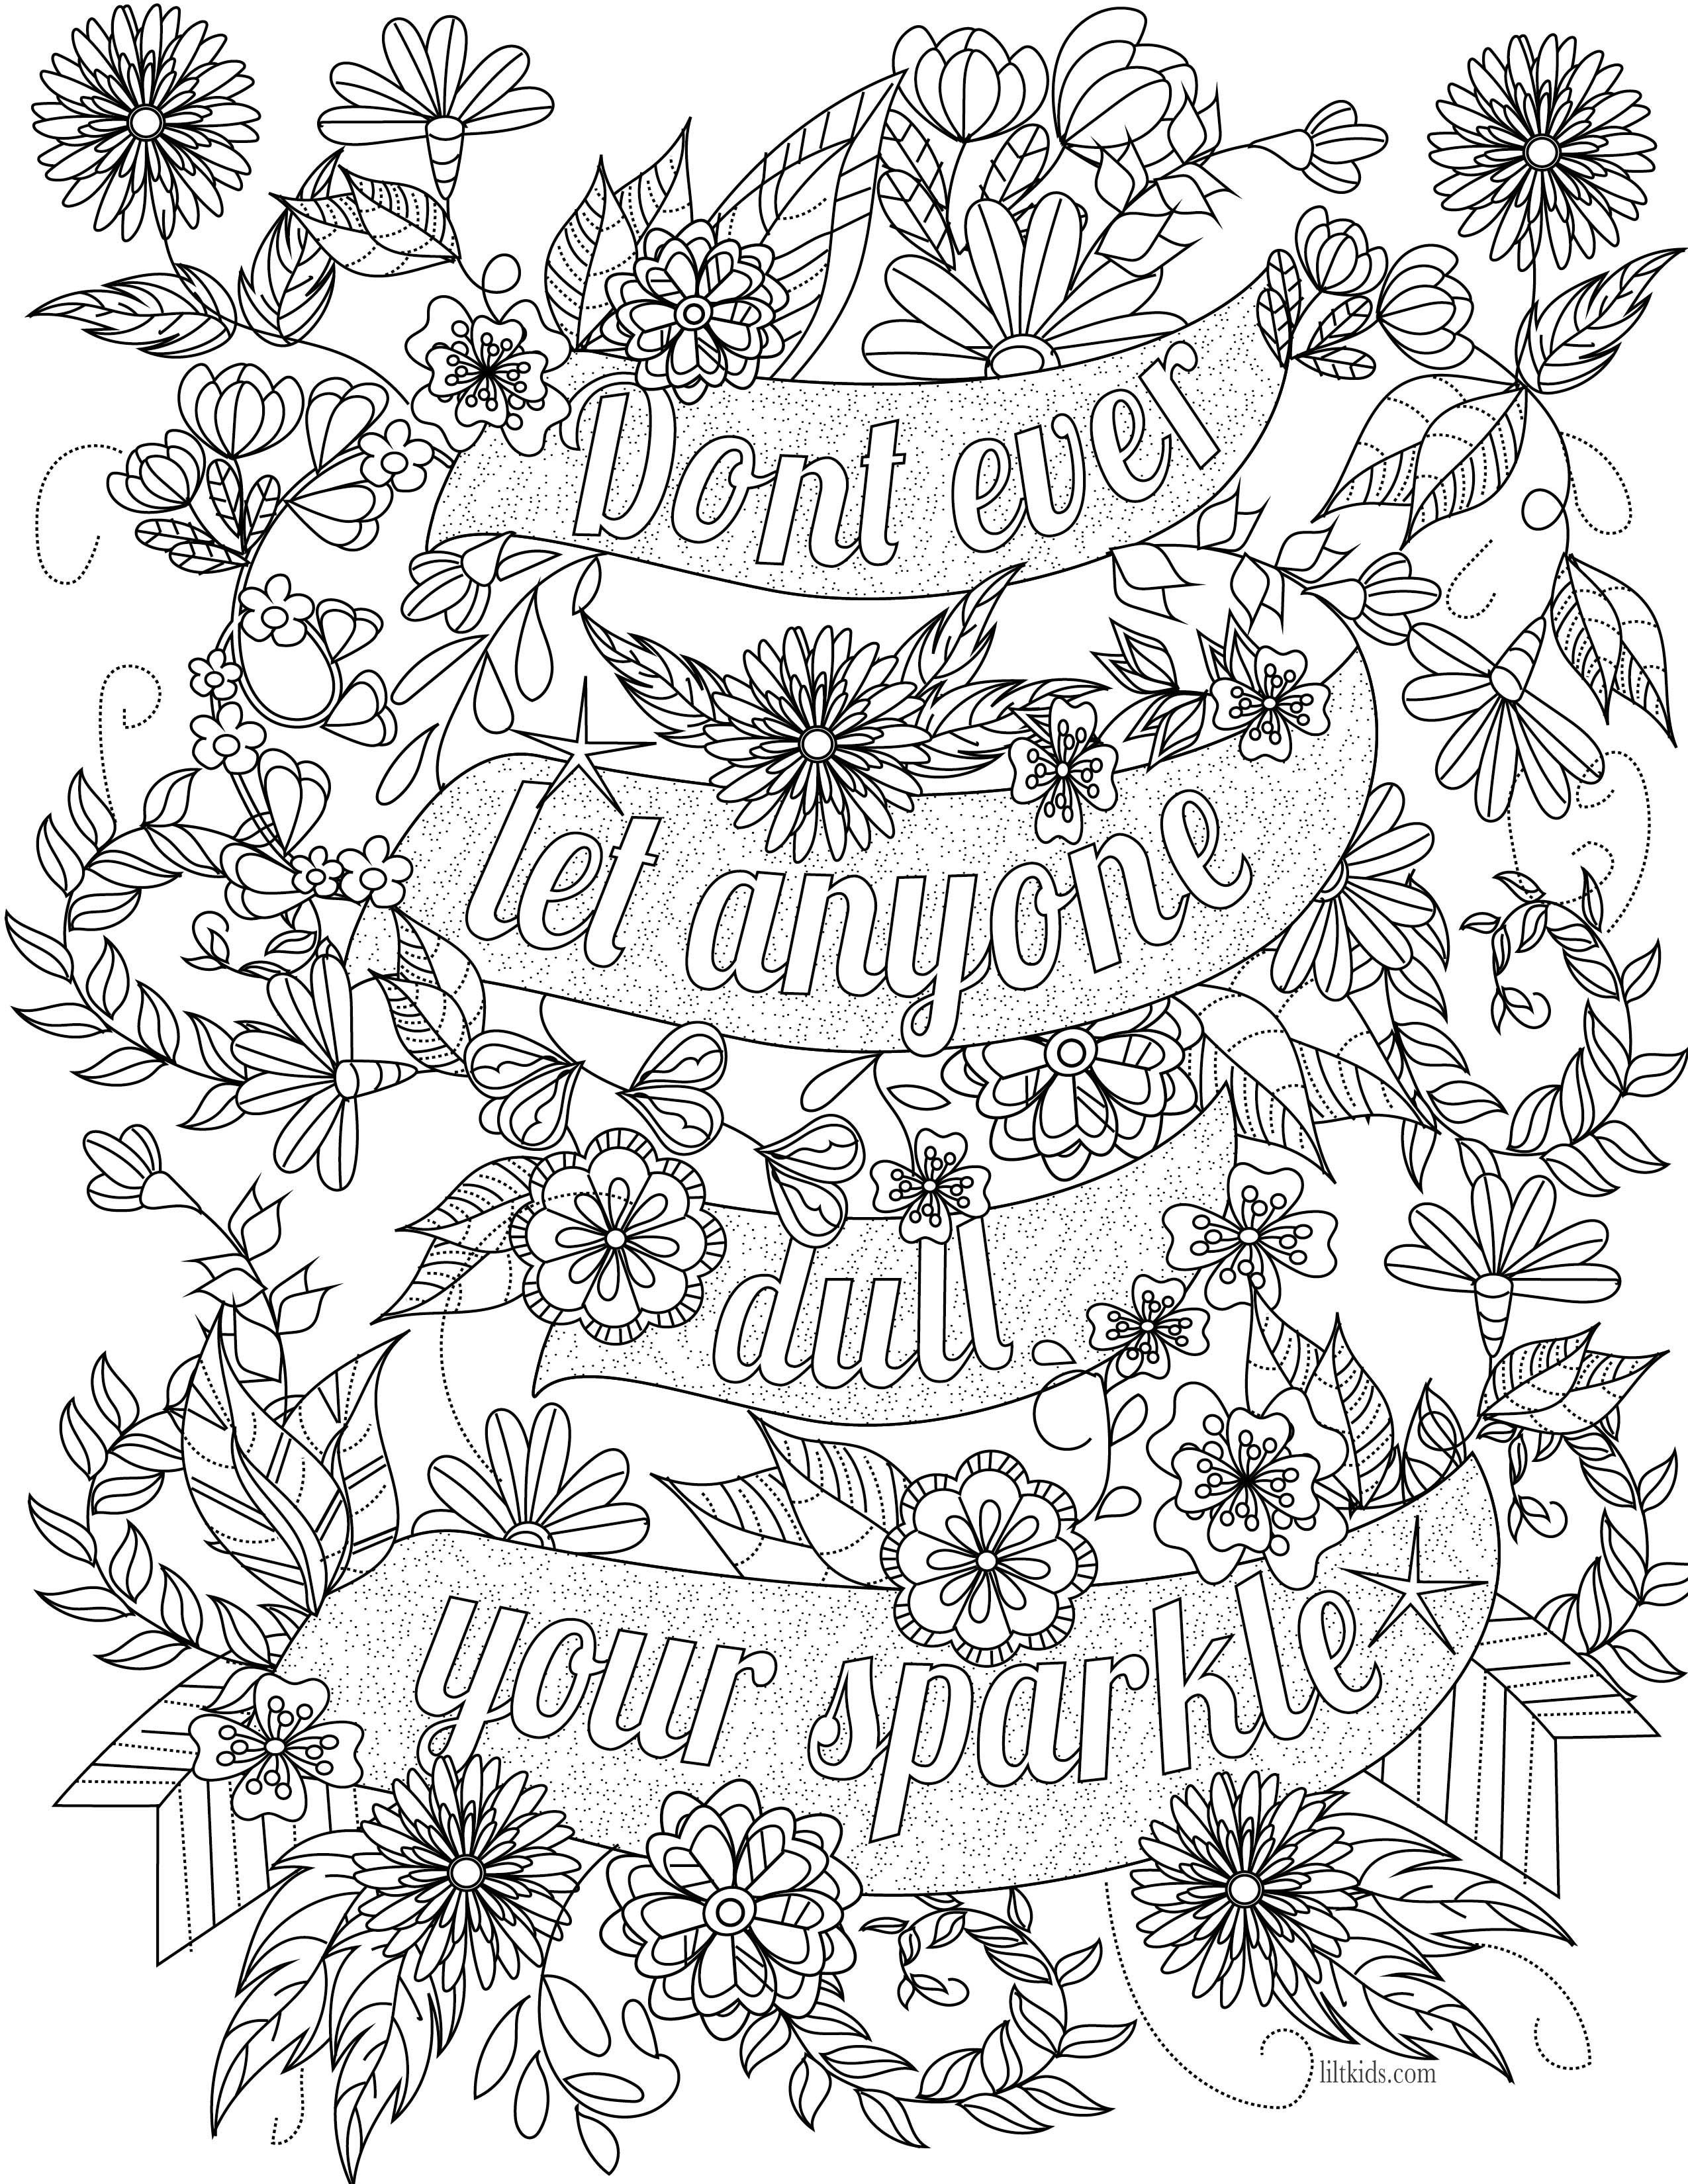 St Augustine Coloring Page Images Of One Tree Hill Quote Coloring Pages Sabadaphnecottage